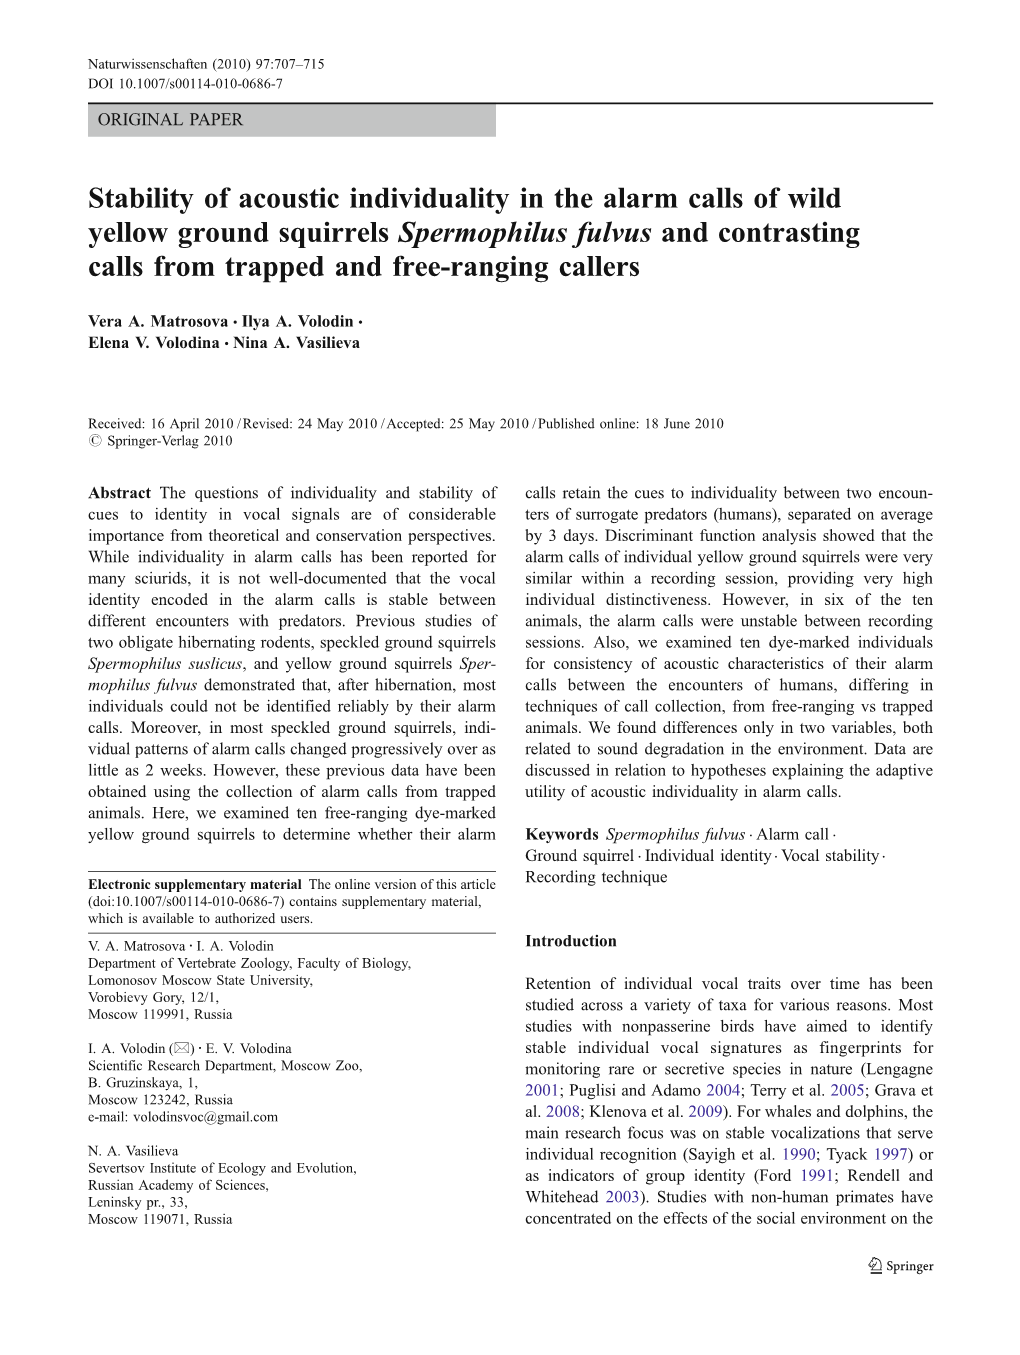 Stability of Acoustic Individuality in the Alarm Calls of Wild Yellow Ground Squirrels Spermophilus Fulvus and Contrasting Calls from Trapped and Free-Ranging Callers